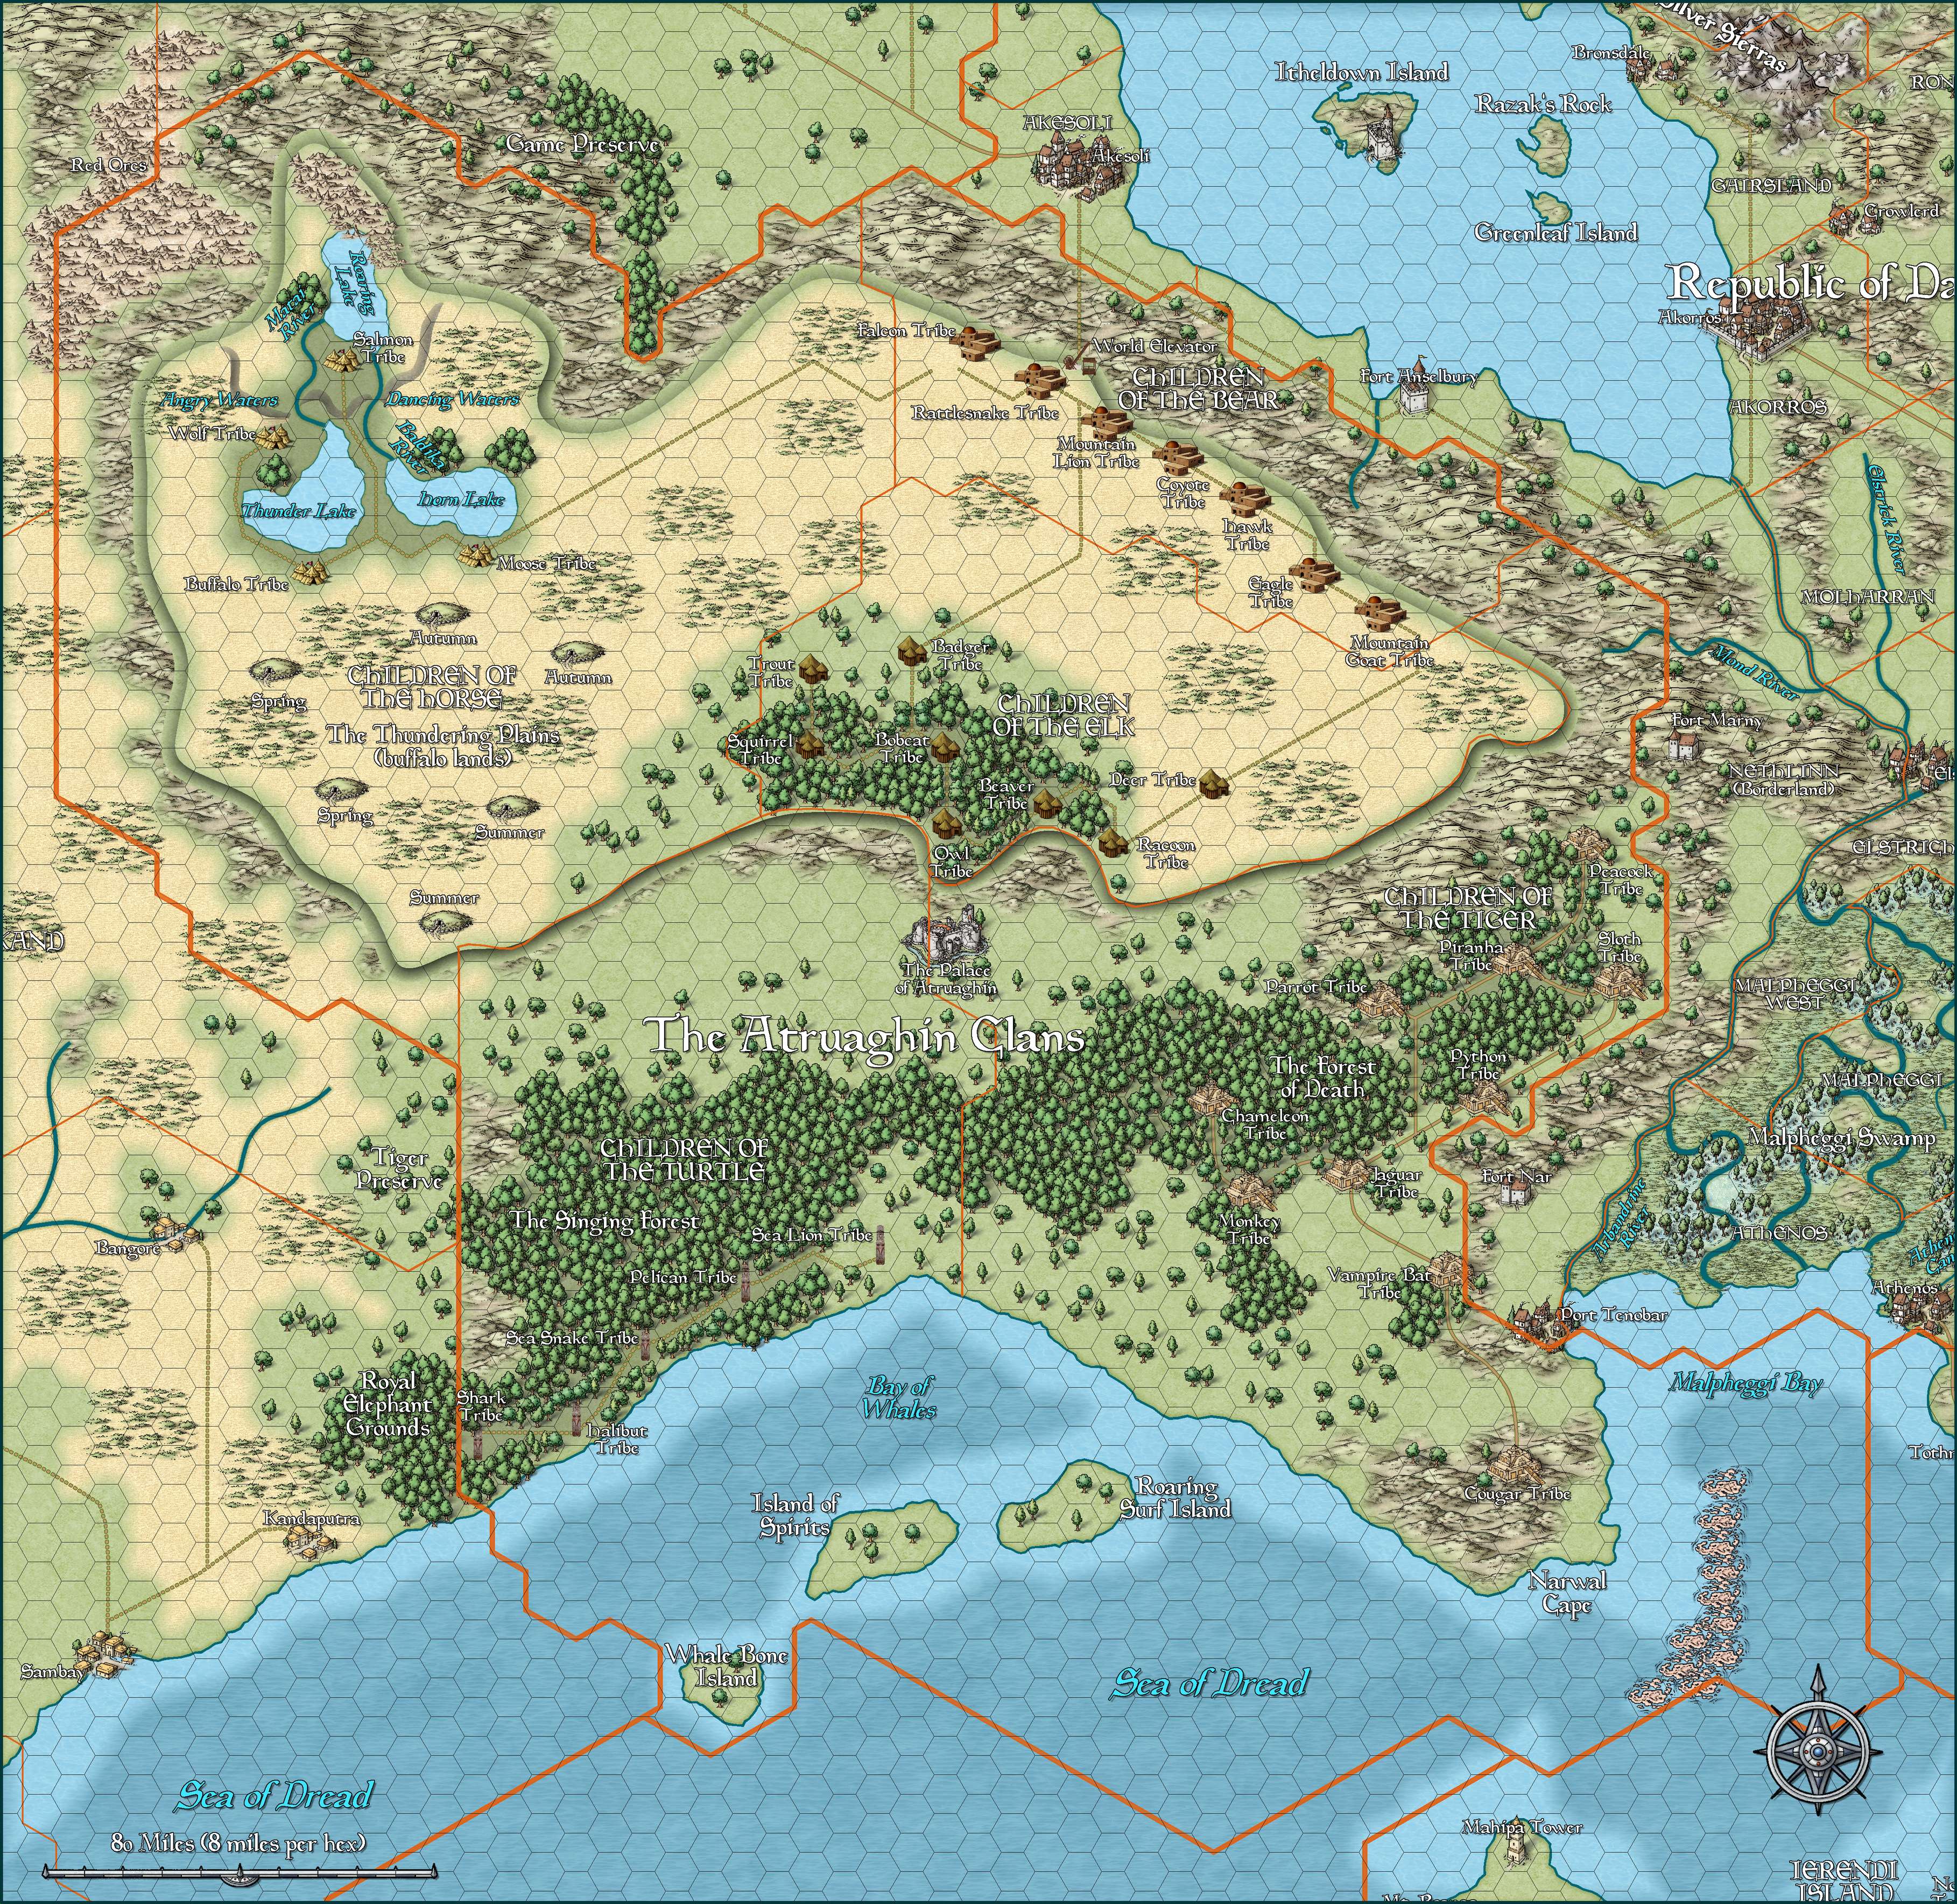 The Atruaghin Clans, 8 miles per hex by Jason Hibdon, May 2020